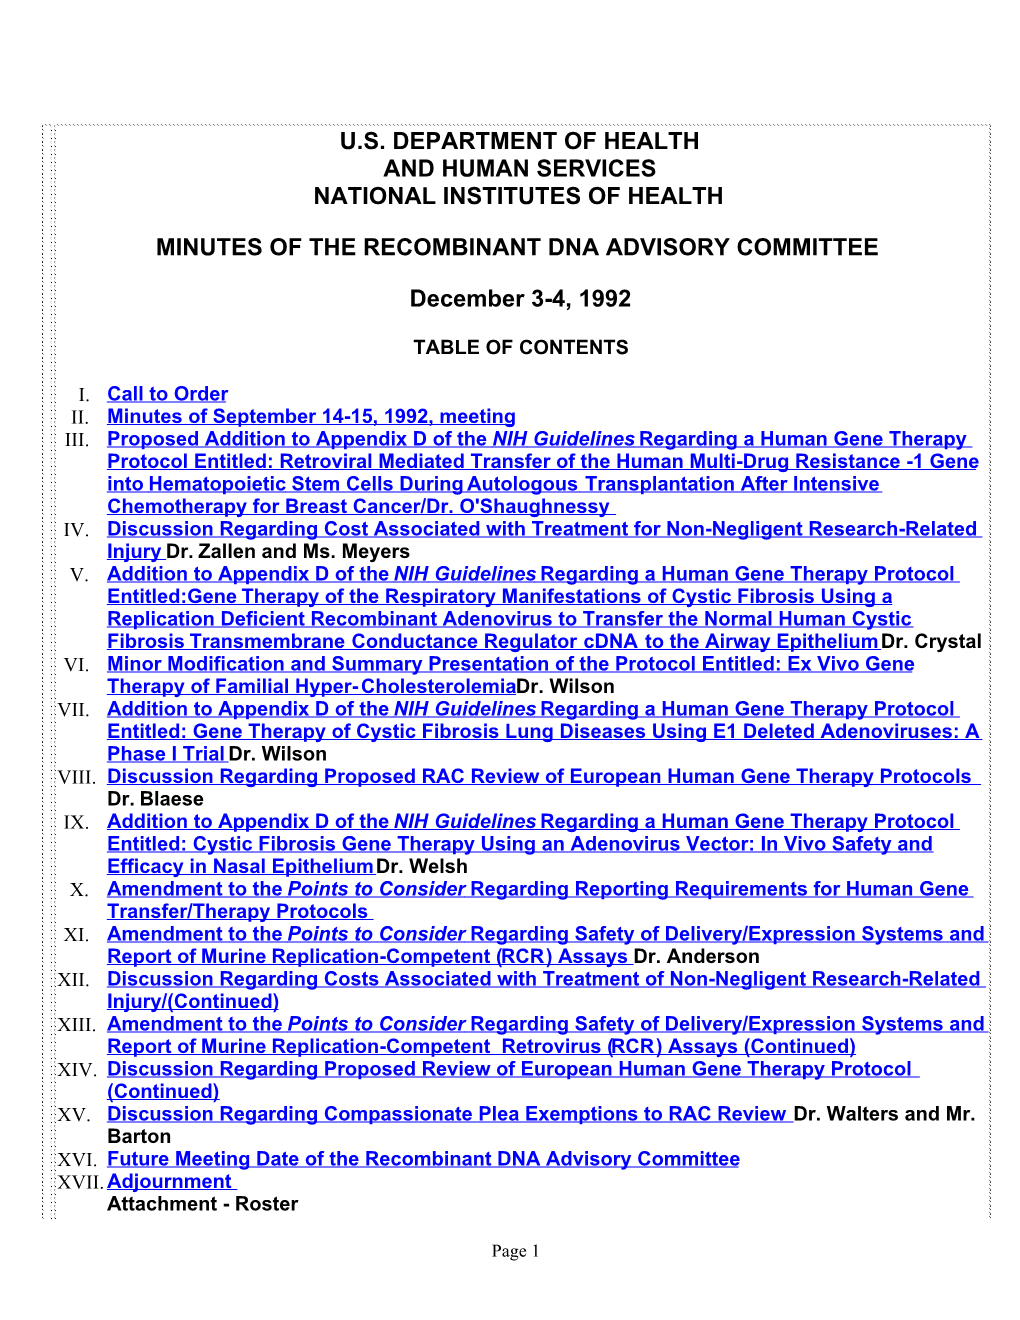 U.S. Department of Health and Human Services National Institutes of Health Minutes of the Recombinant Dna Advisory Committee